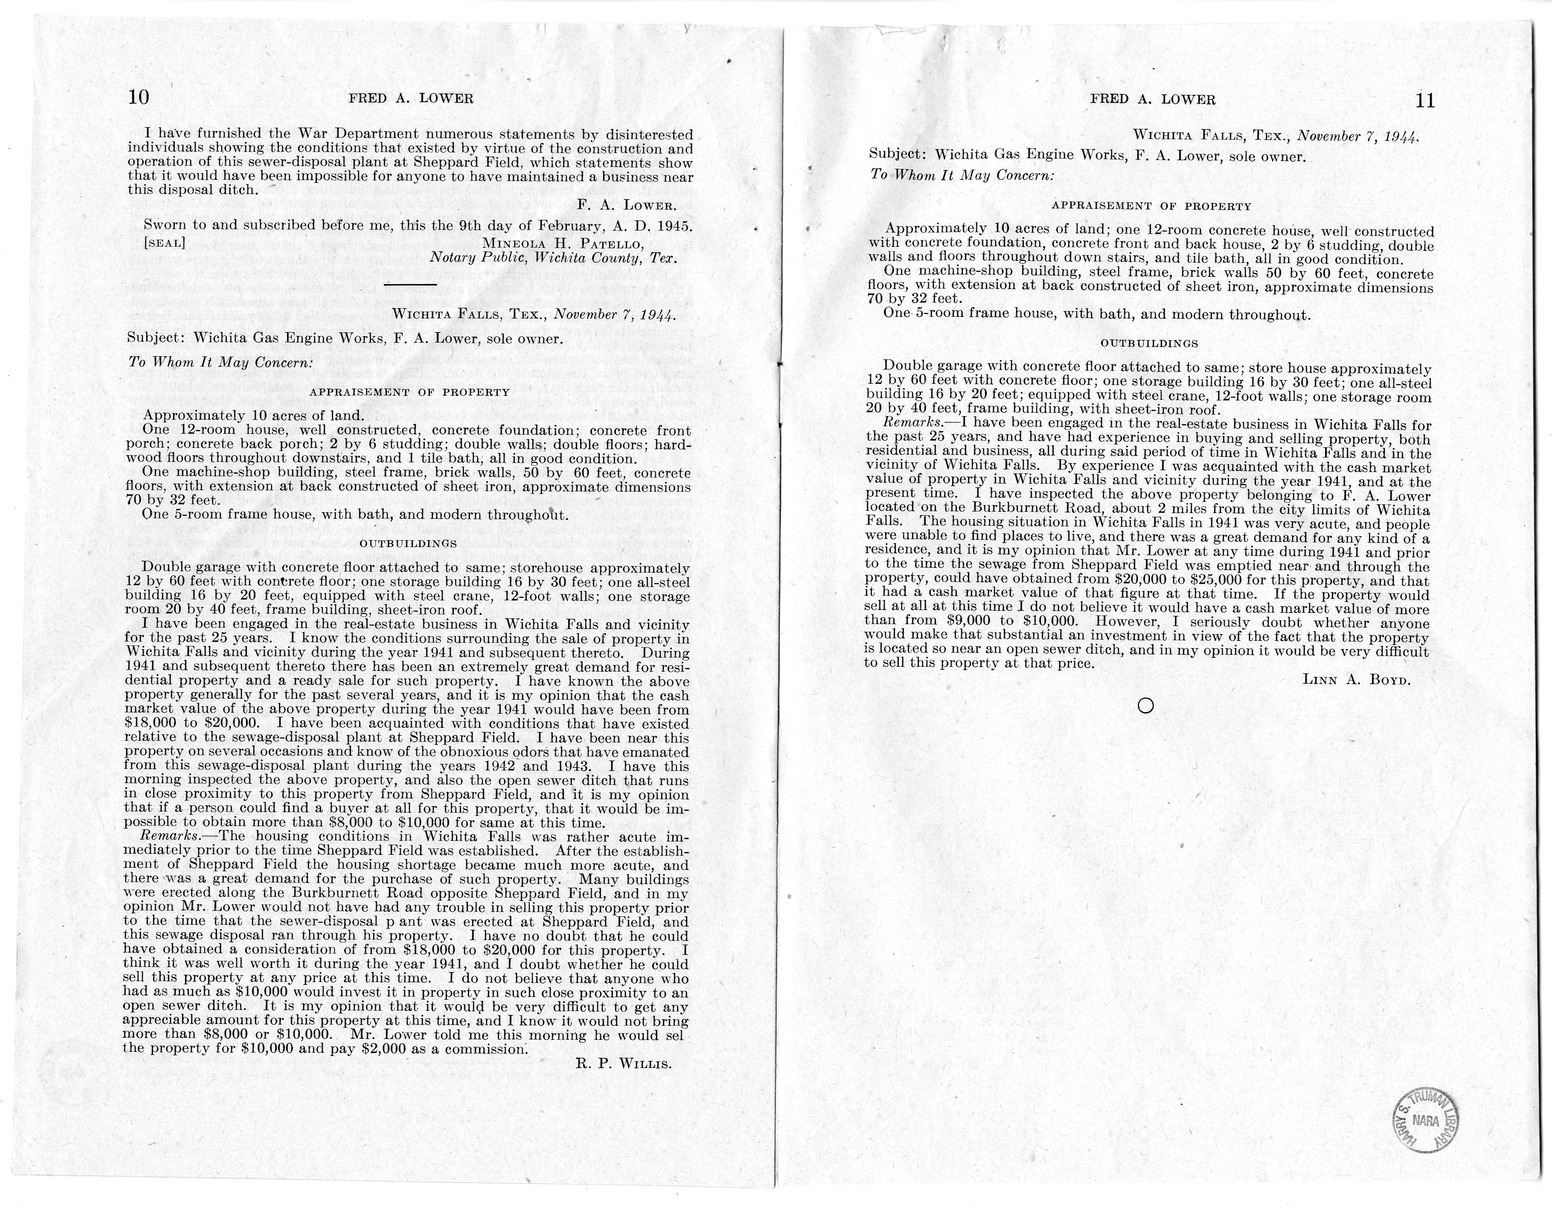 Memorandum from Frederick J. Bailey to M. C. Latta, H.R. 904, For the Relief of Fred A. Lower, with Attachments